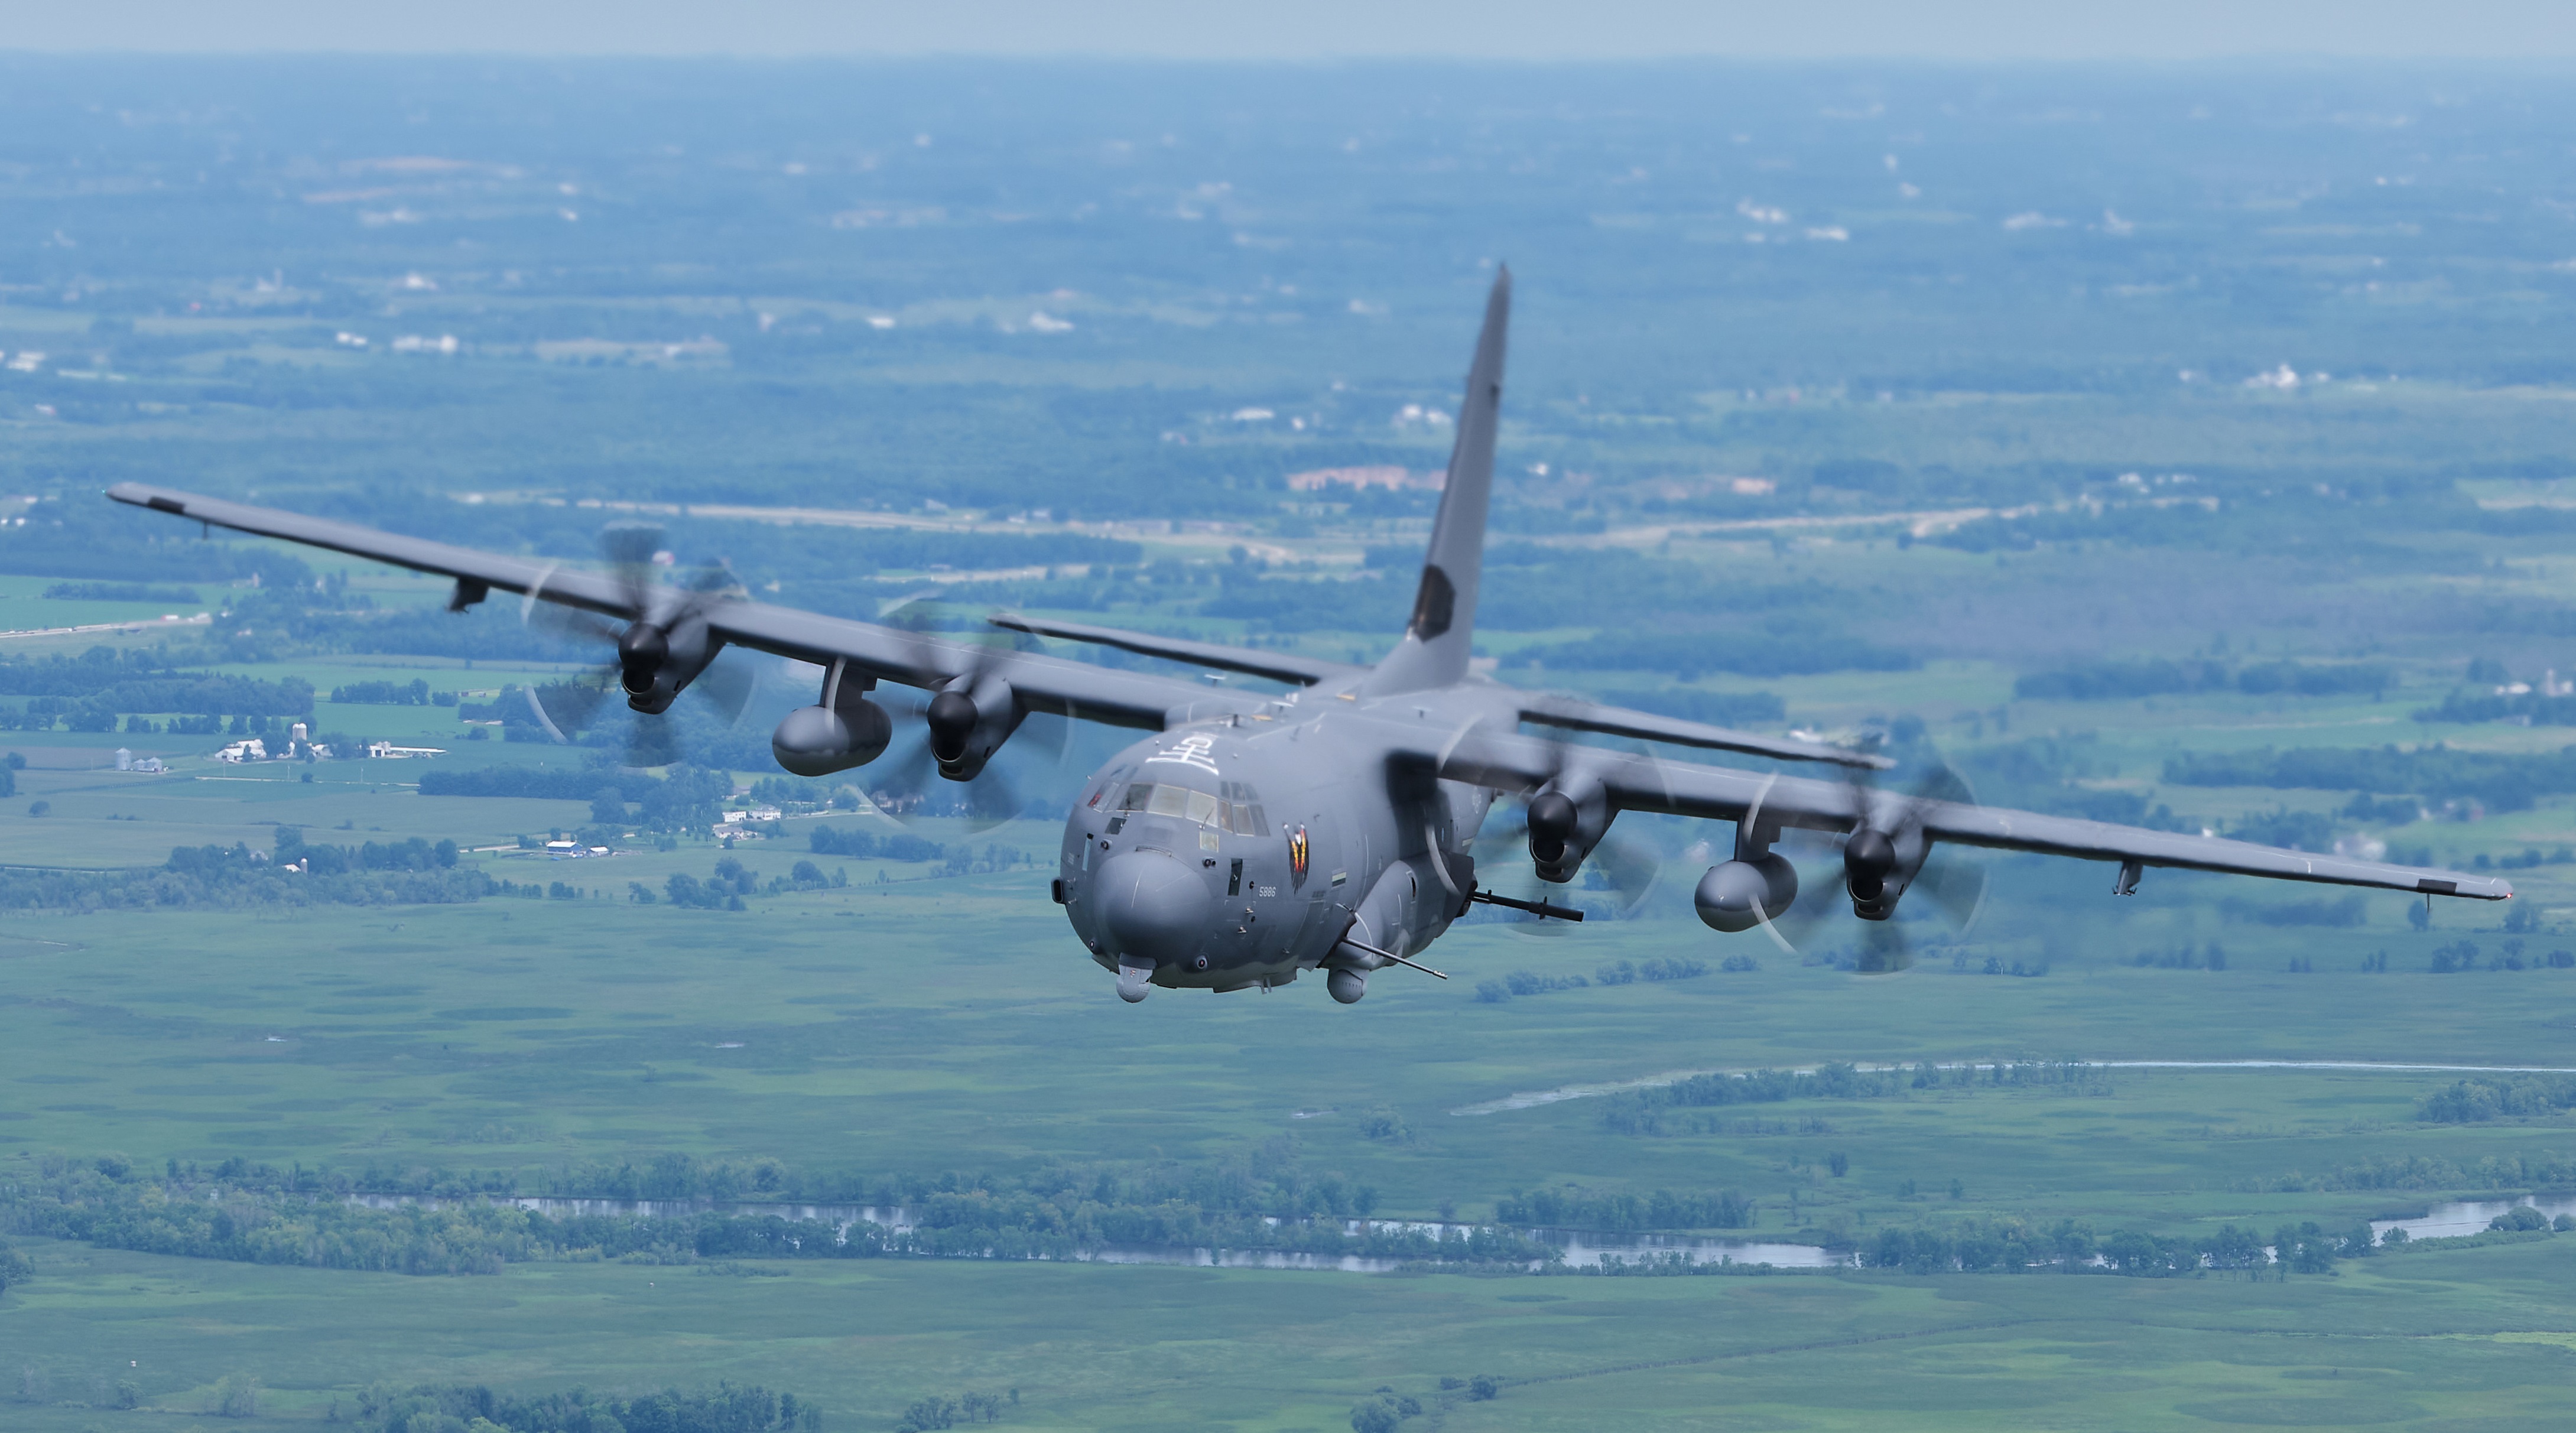 The US sends the latest Lockheed AC-130J Ghostrider flying support battery with AGM-114 Hellfire, AGM-176 Griffin missiles and GBU-39 bombs to the Republic of Korea for the first time